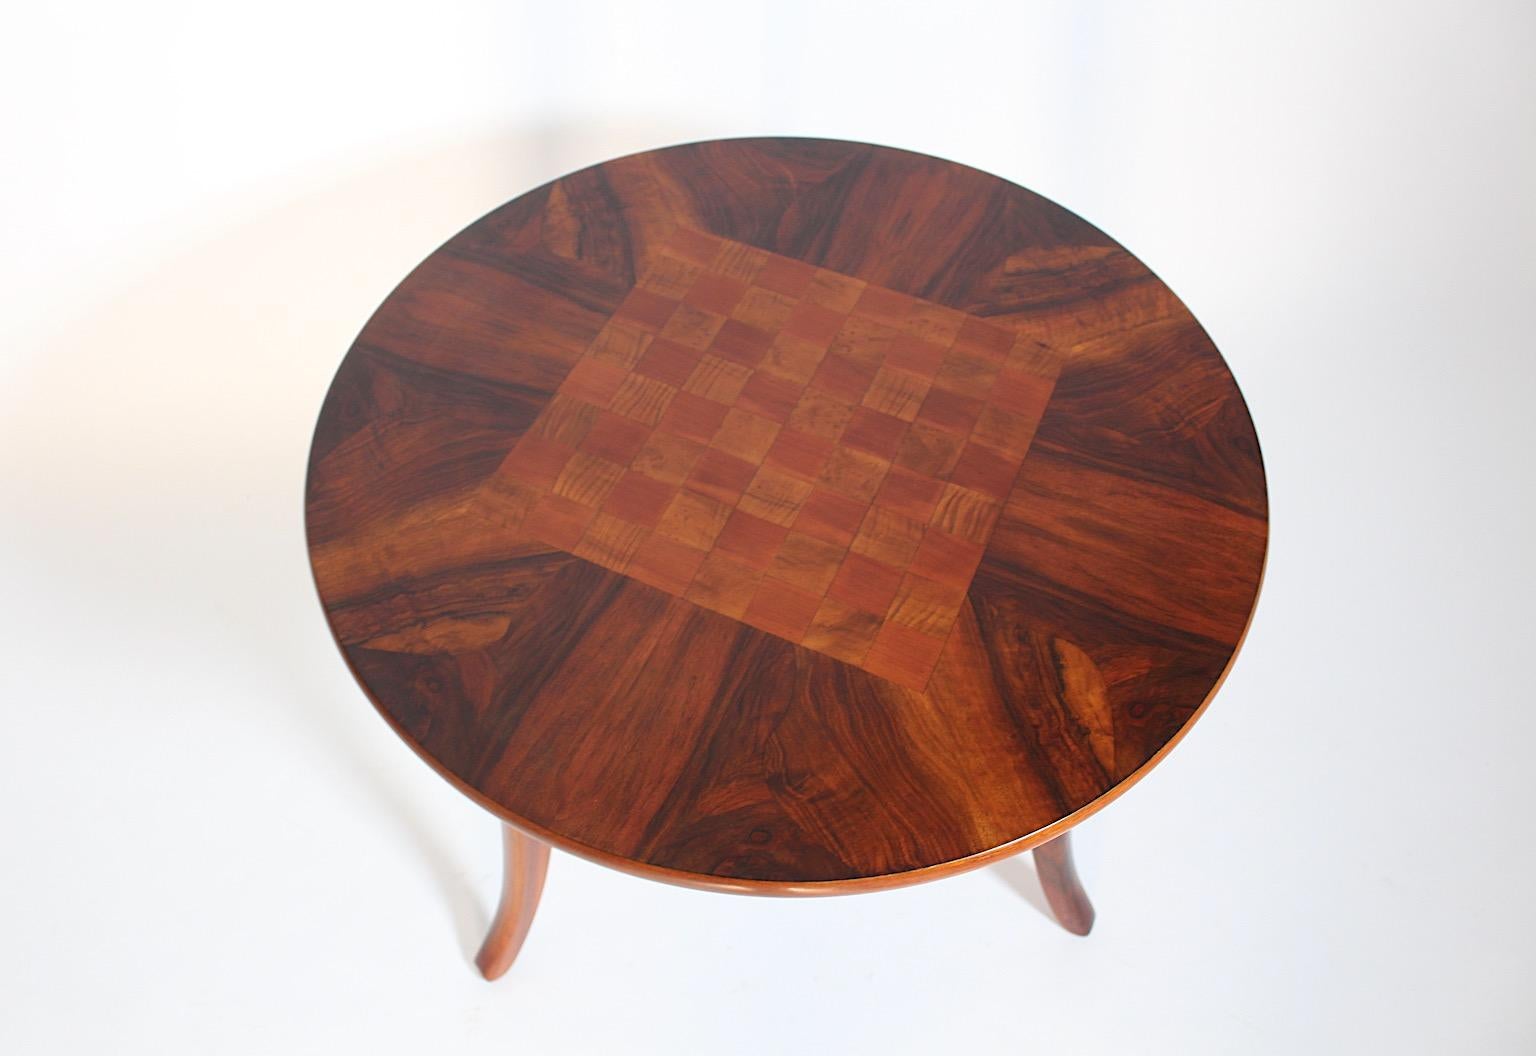 Art Deco vintage side table or coffee table circular like with a chess table top from walnut, cherry and poplar veneer by Josef Frank for Haus & Garten circa 1925 Vienna.
An amazing side table with chess pattern topped from solid walnut, cherry and